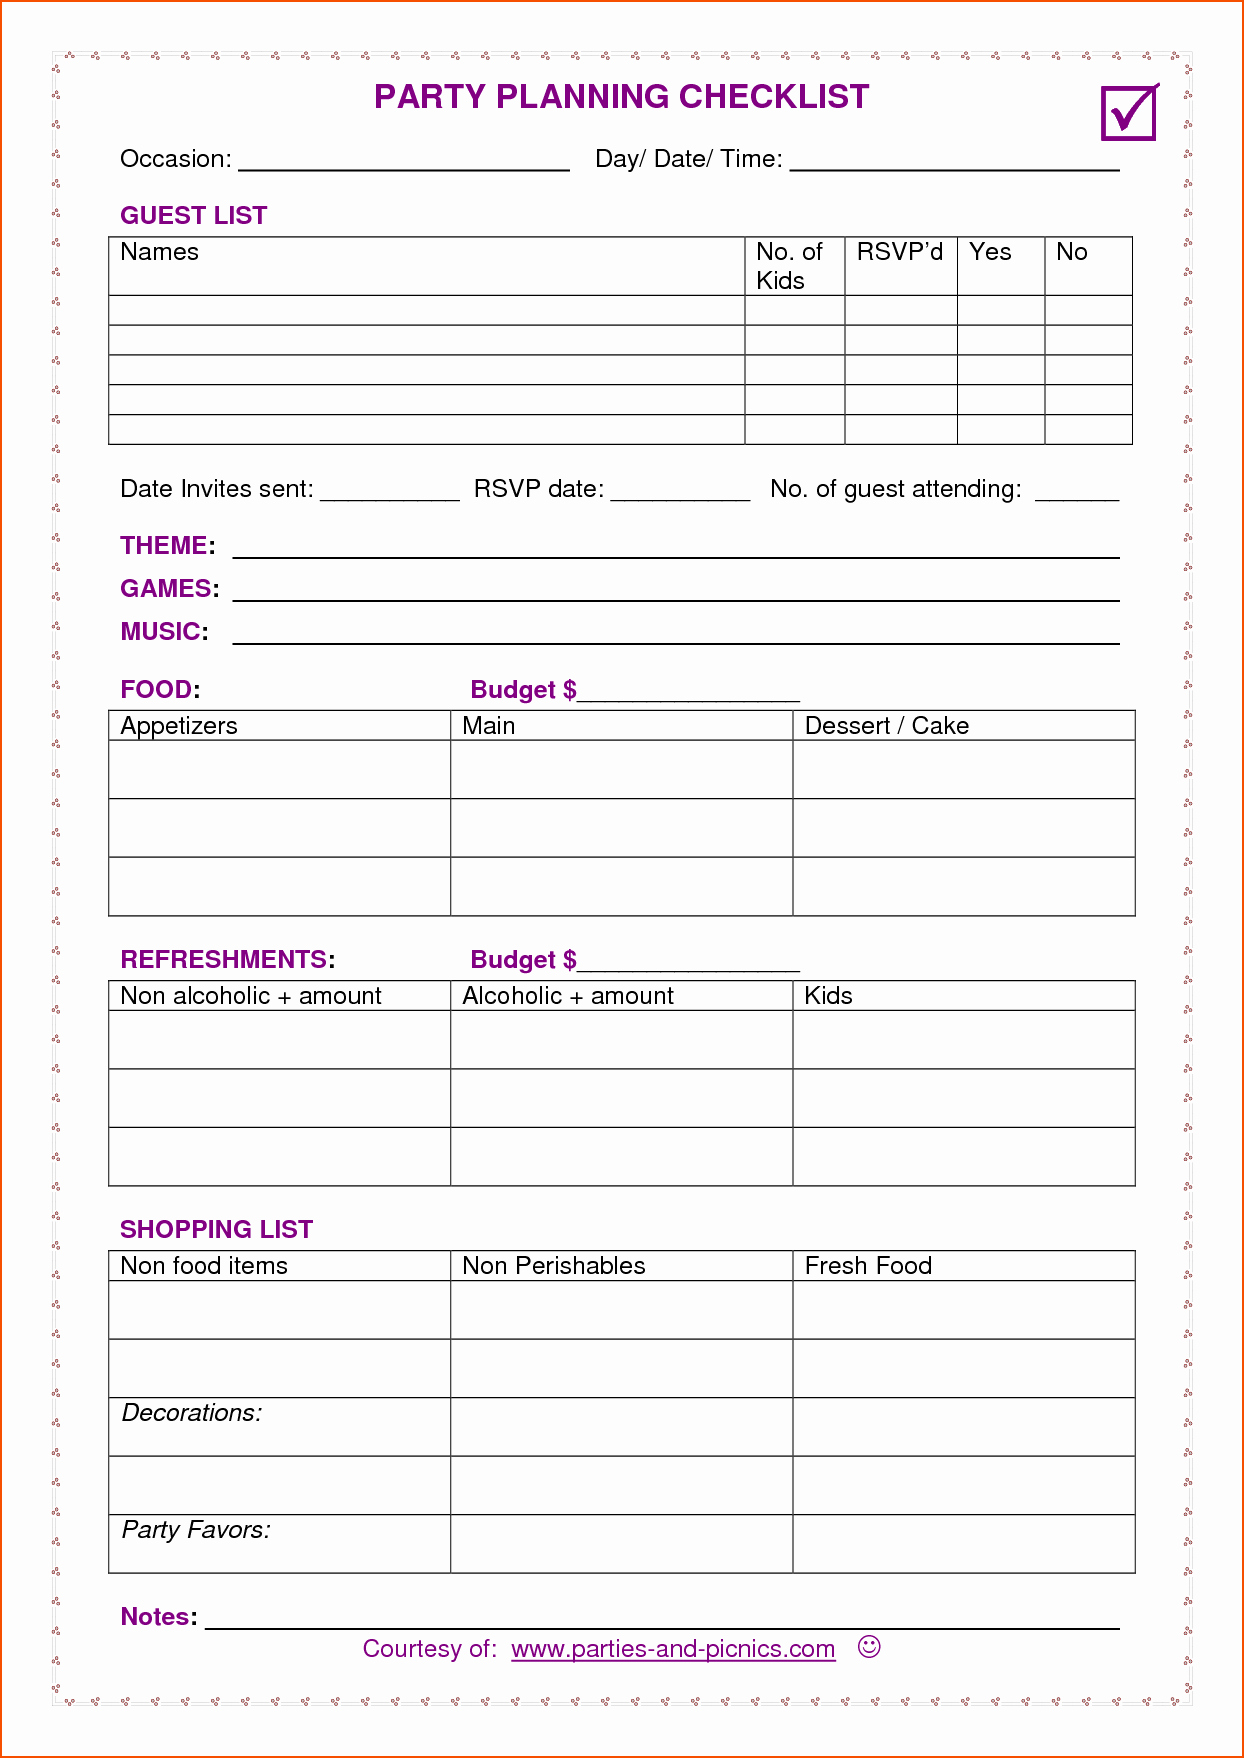 Party Plan Checklist Template Beautiful 7 Party Planner Checklist Bookletemplate